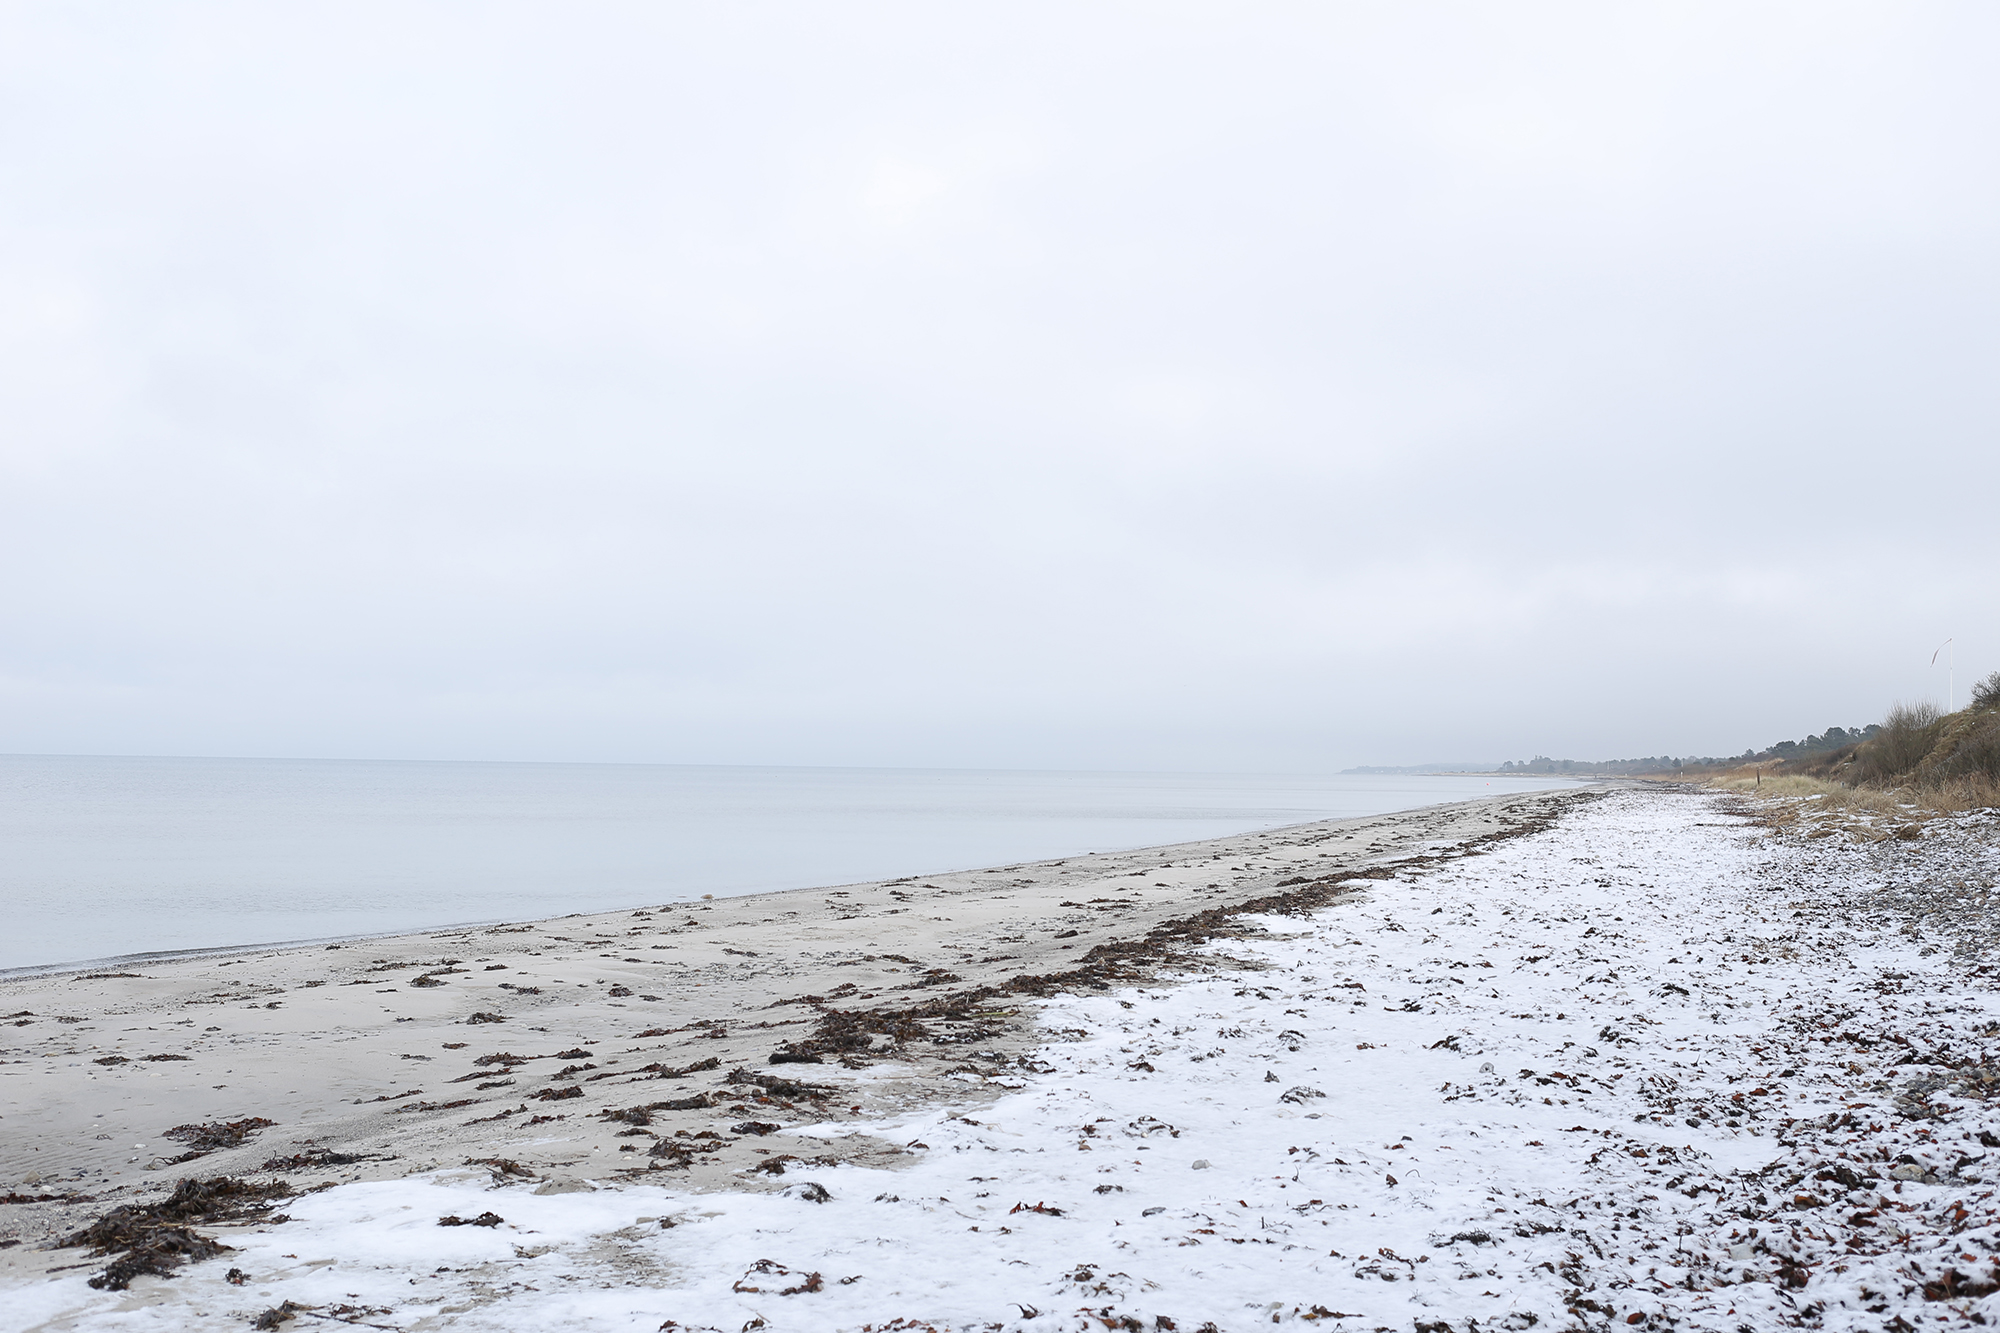 A desaturated color photograph of snow on a beach.